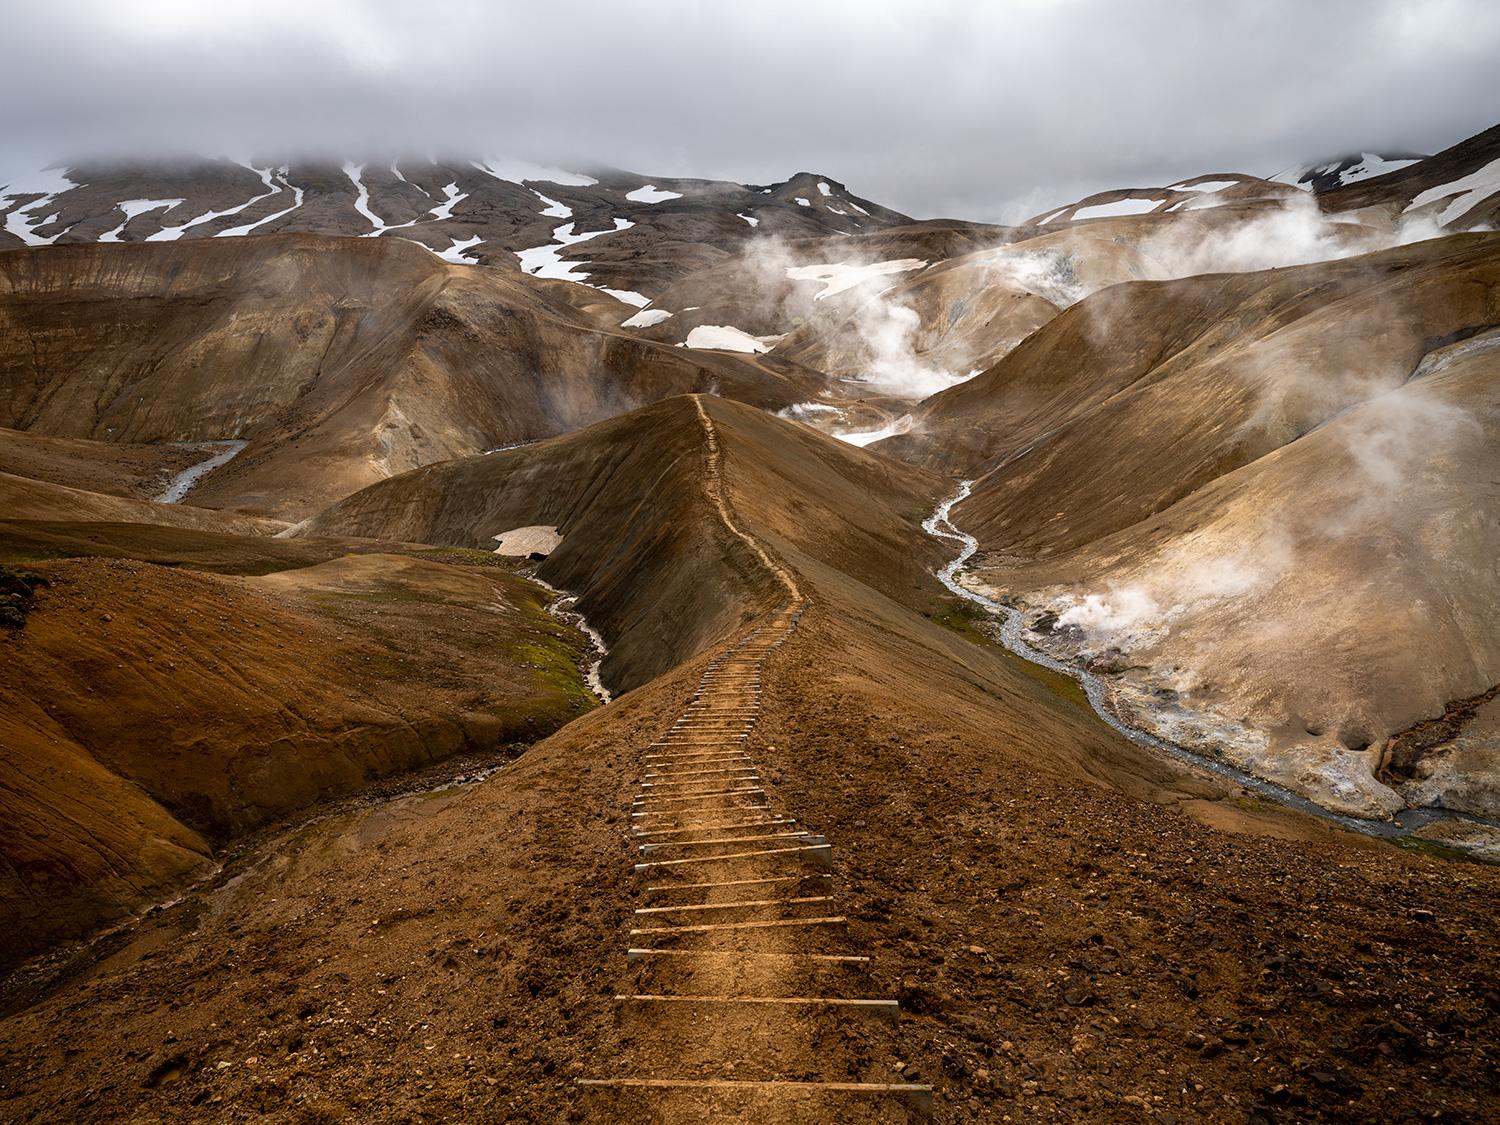 These young mountains overlook the Icelandic Highland region's Kerlingarfjöll geothermal volcanic system of hissing fumaroles, spitting hot vents, and steaming geysers. 25-35mph gusts further emphasize the terrestrial orifices from which the Earth